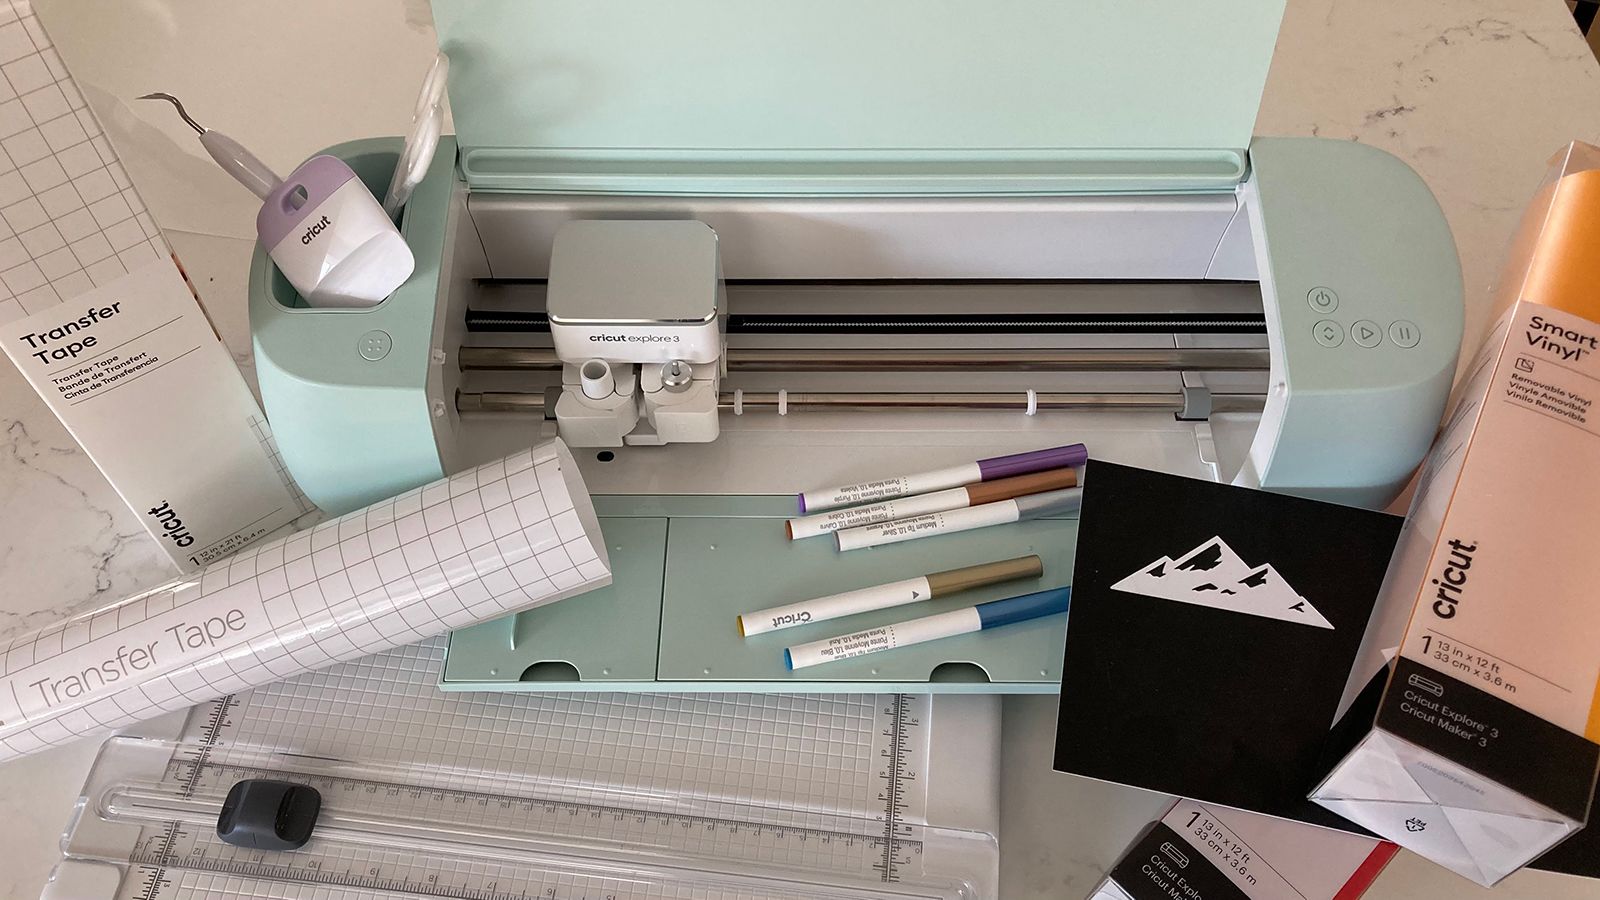 How to Choose the Right Cricut Machine - Twelve On Main